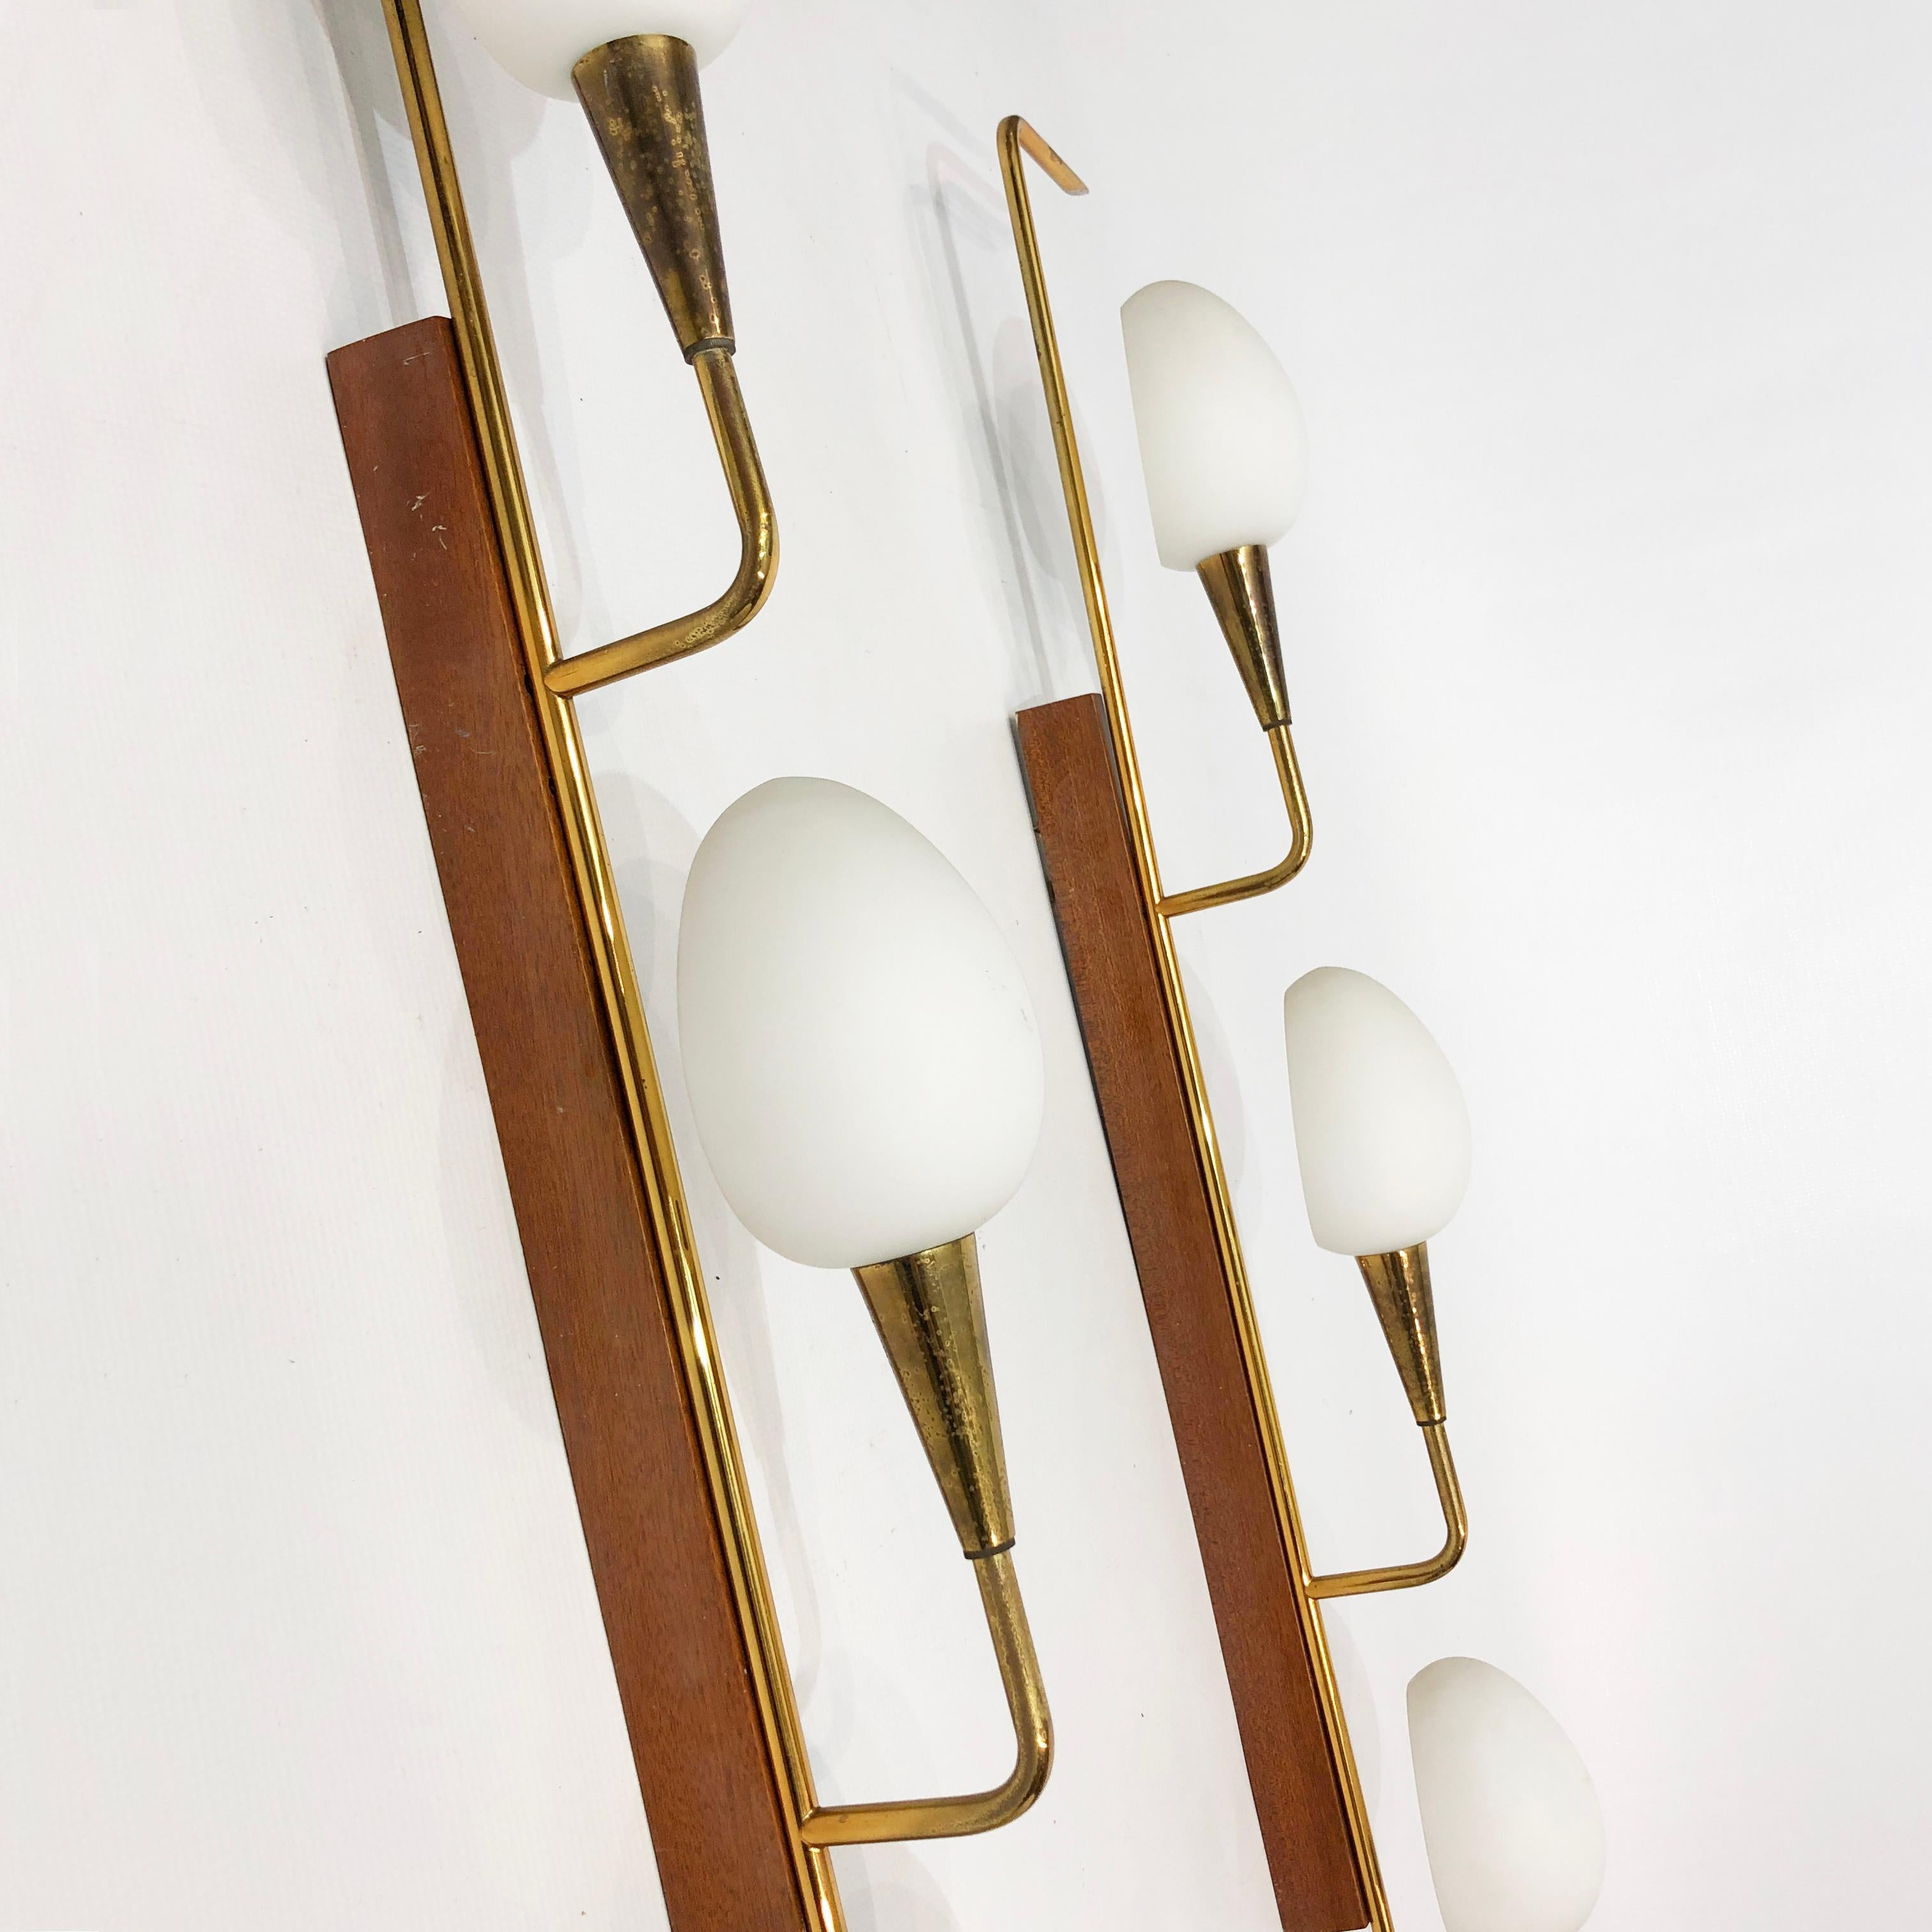 Maison Lunel Pair Of Mid-Century  Teak And Brass Wall Lights 1950s For Sale 2